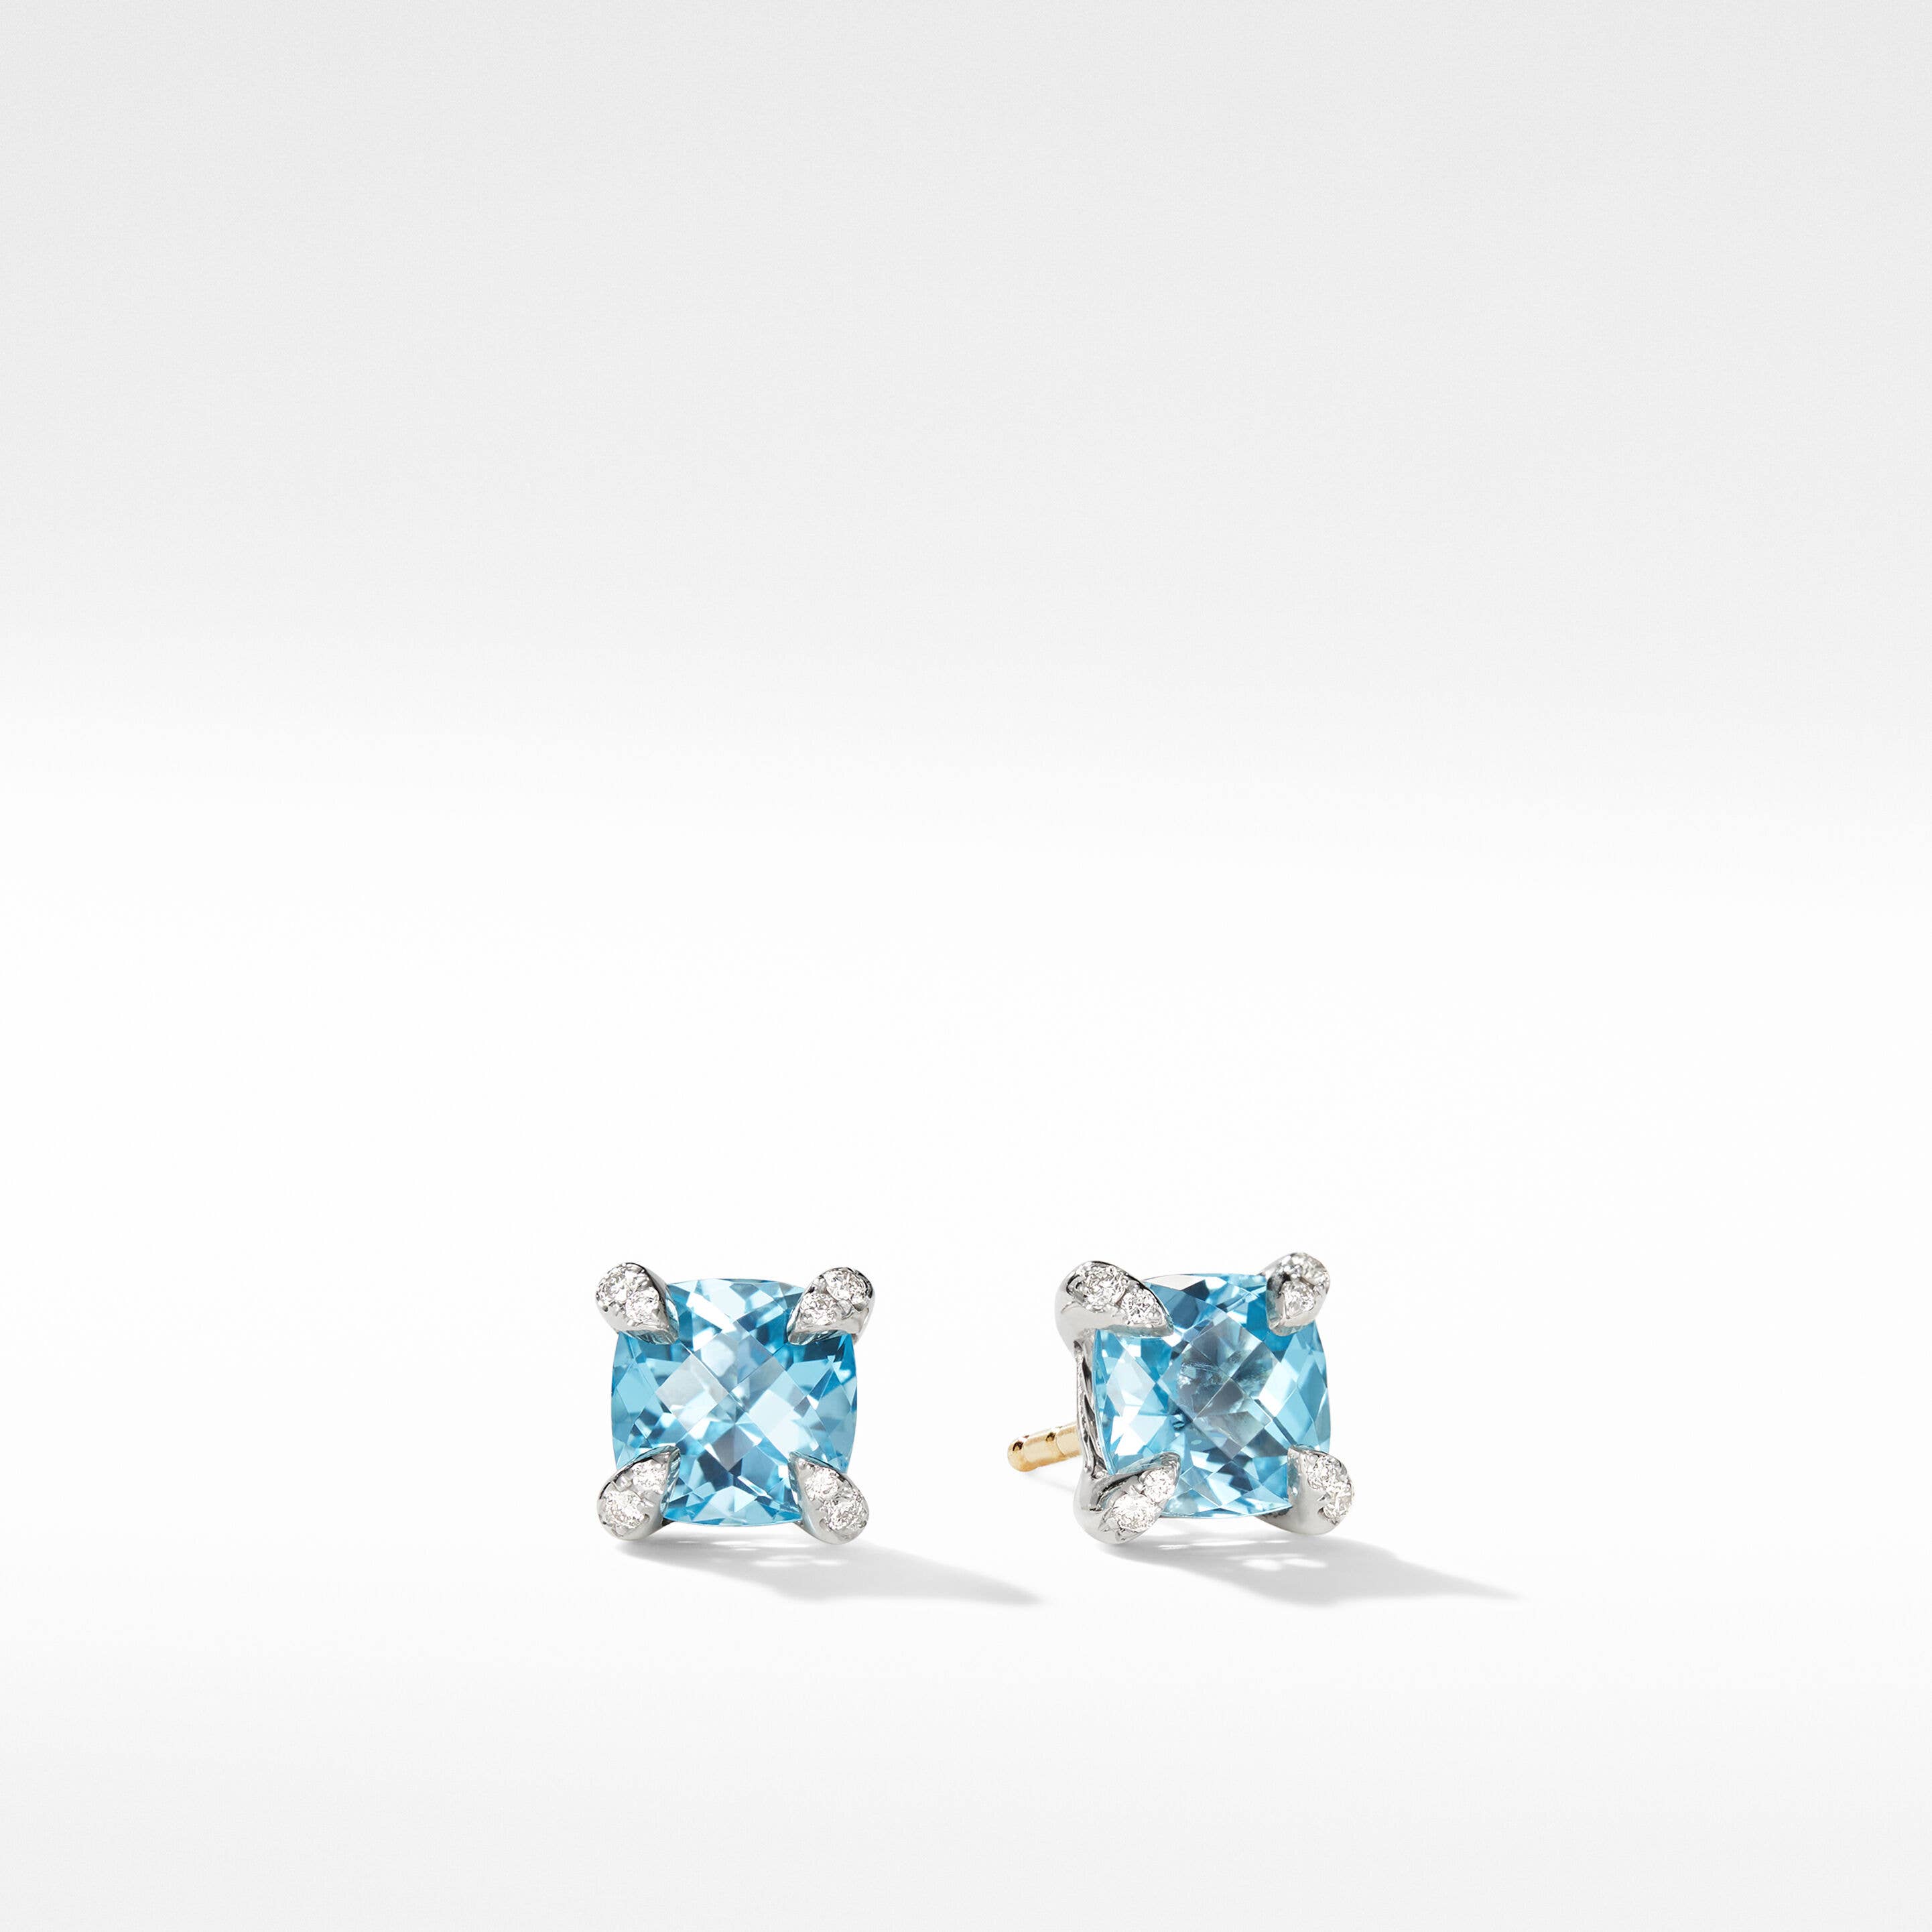 Petite Chatelaine® Stud Earrings in Sterling Silver with Blue Topaz and Pavé Diamonds